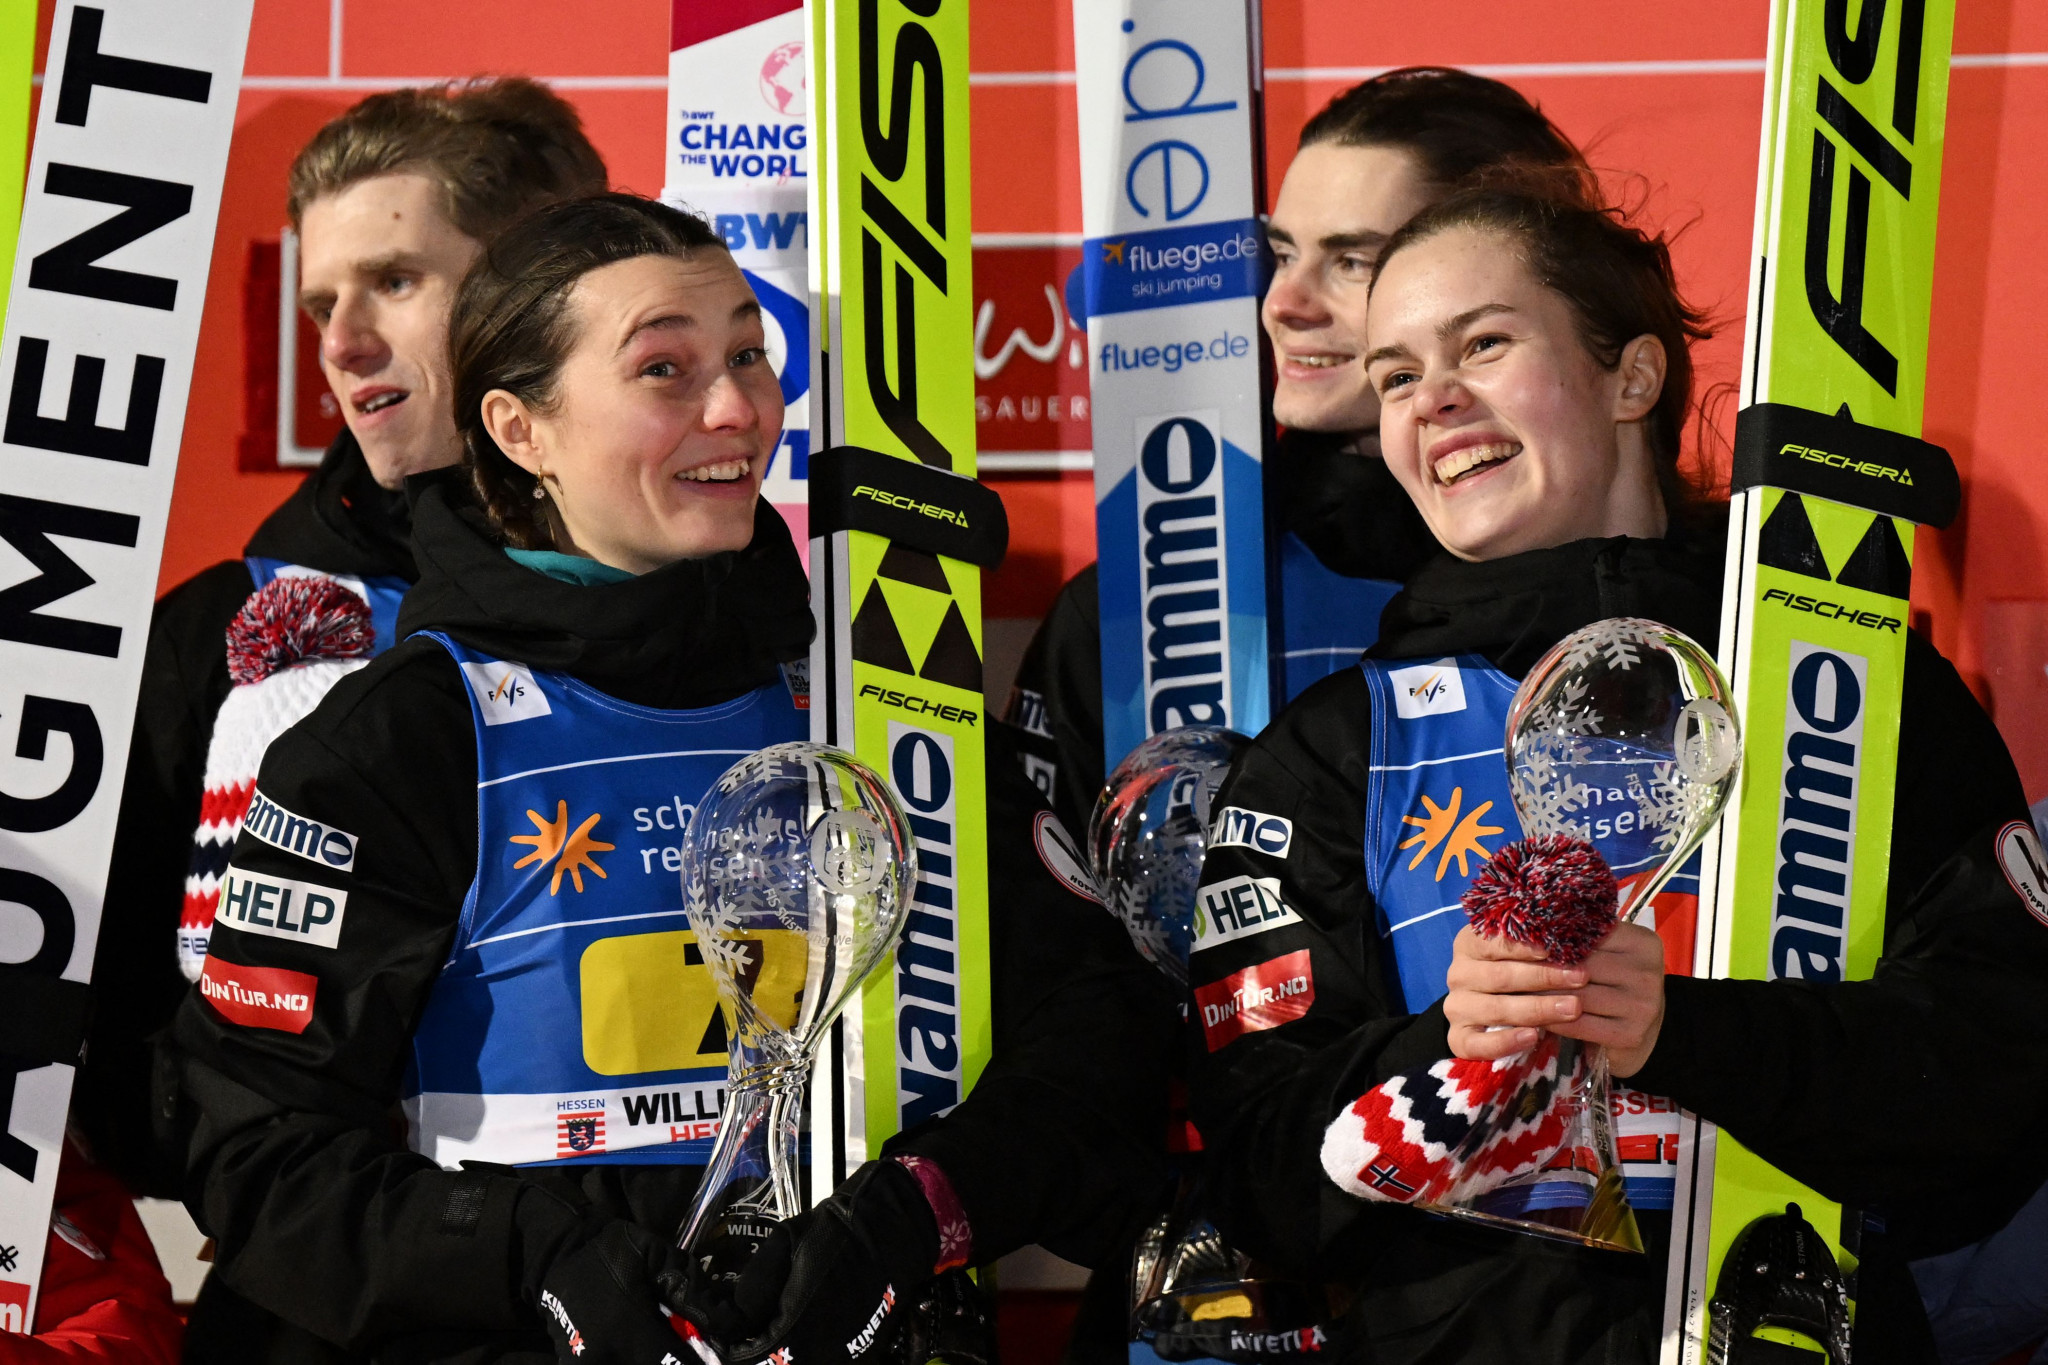 Norway claim mixed team title at Ski Jumping World Cup in Willingen